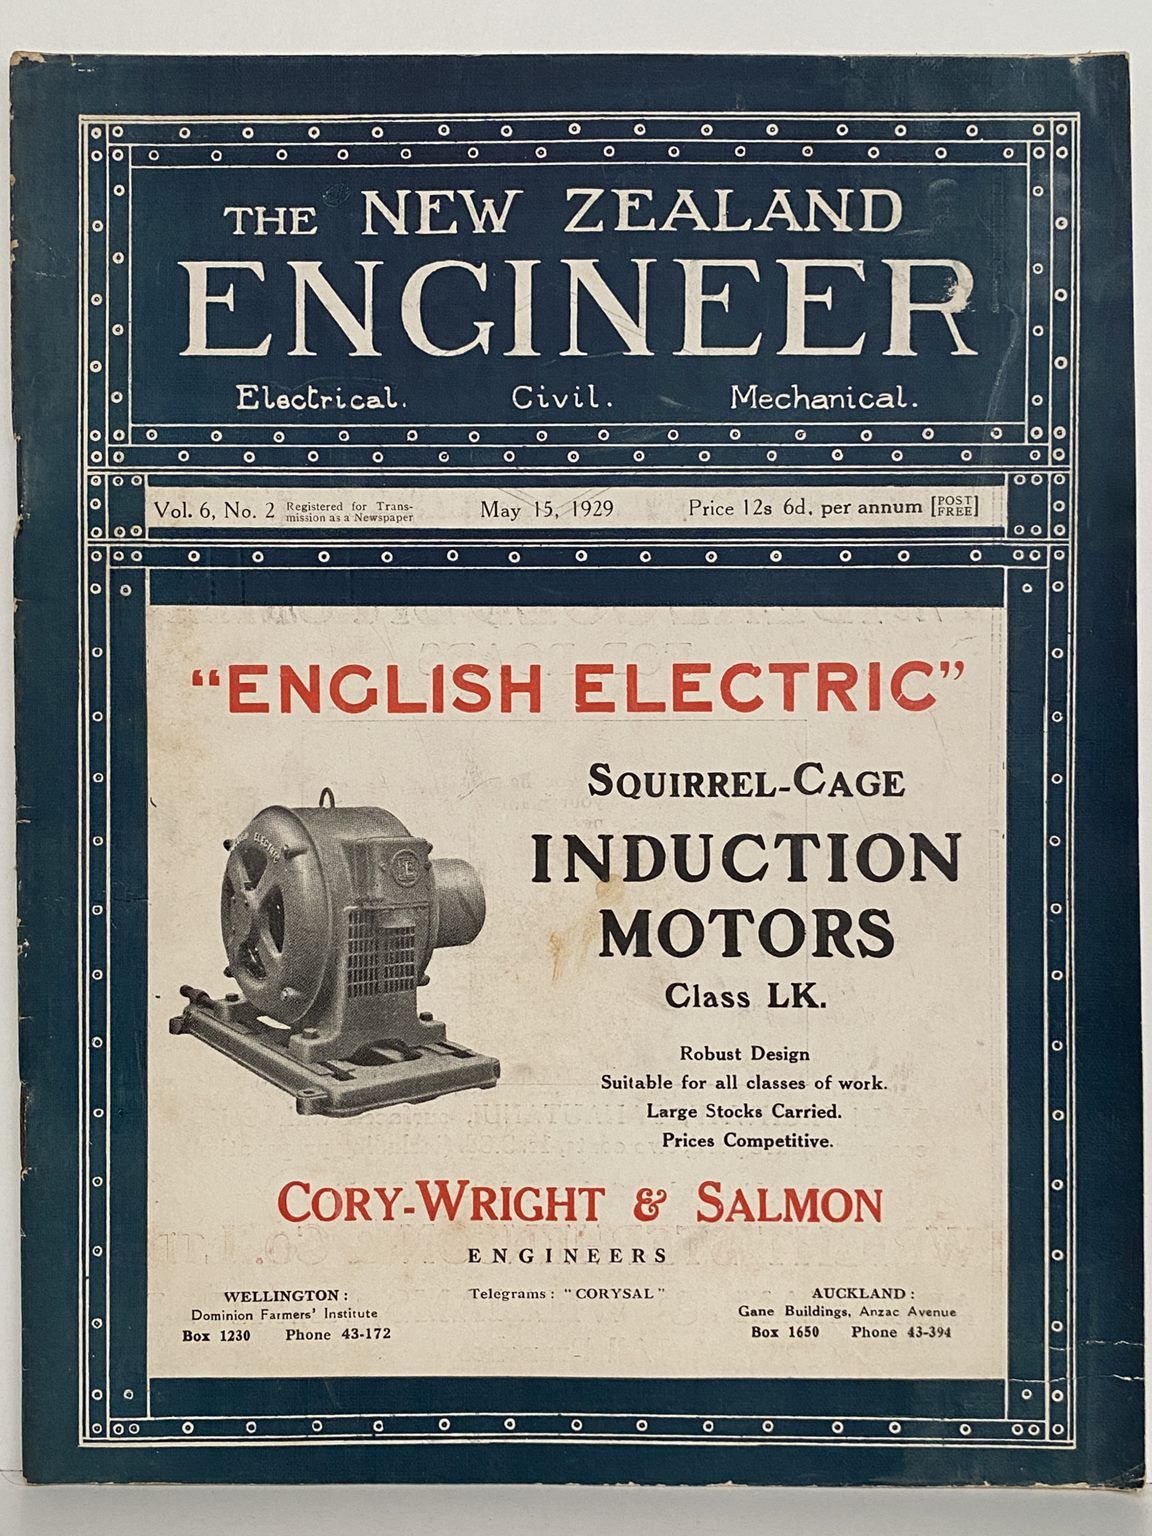 OLD MAGAZINE: The New Zealand Engineer Vol. 6, No. 2 - 15 May 1929